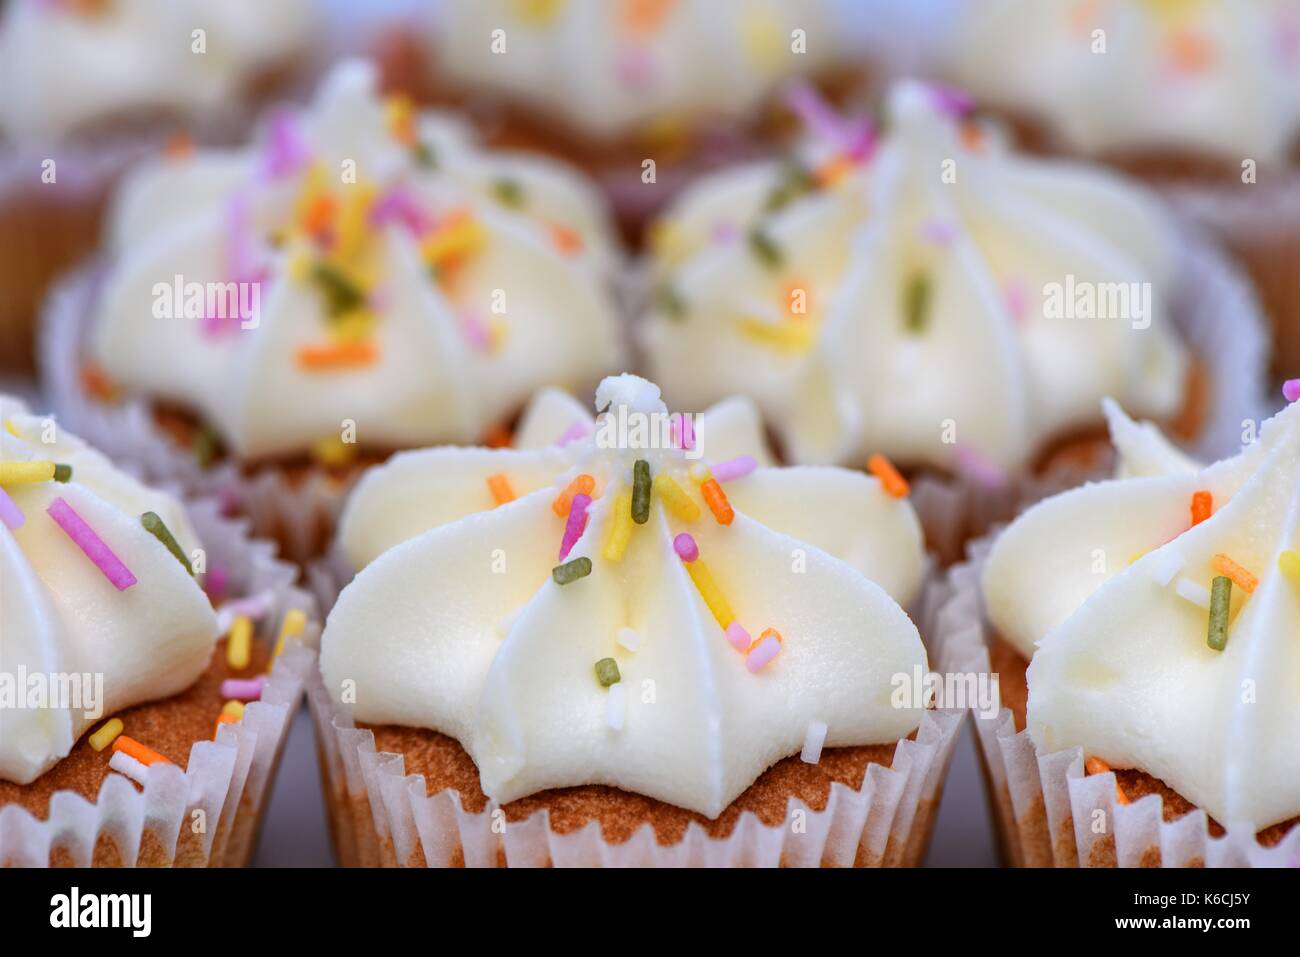 close up macro food photography image of pretty colorful fairy cakes with sprinkles on and blur background Stock Photo